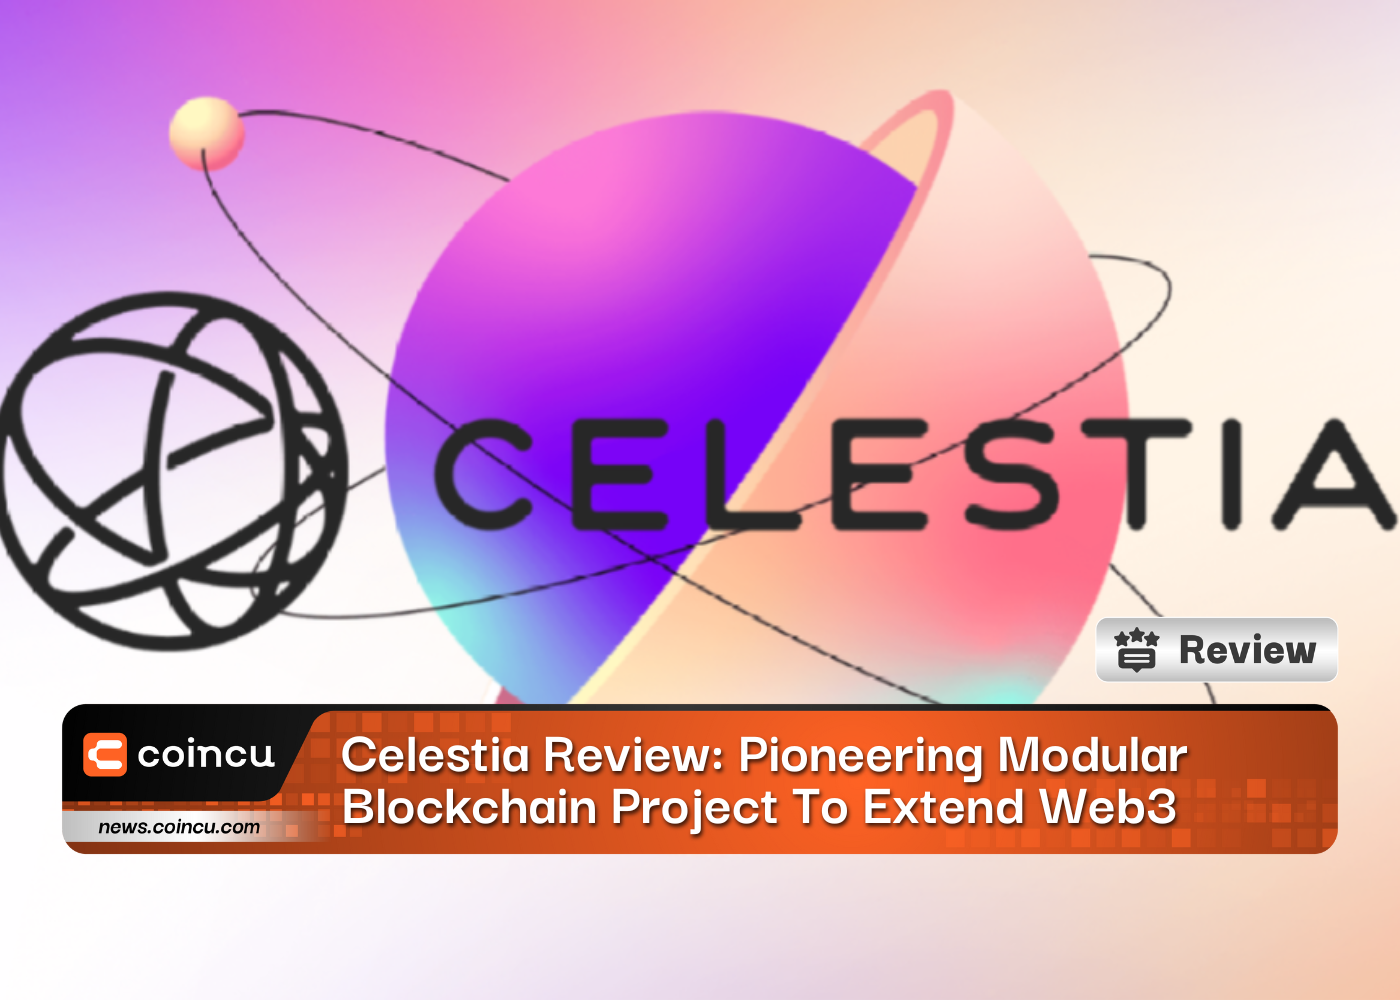 Celestia Review: Pioneering Modular Blockchain Project To Extend Web3